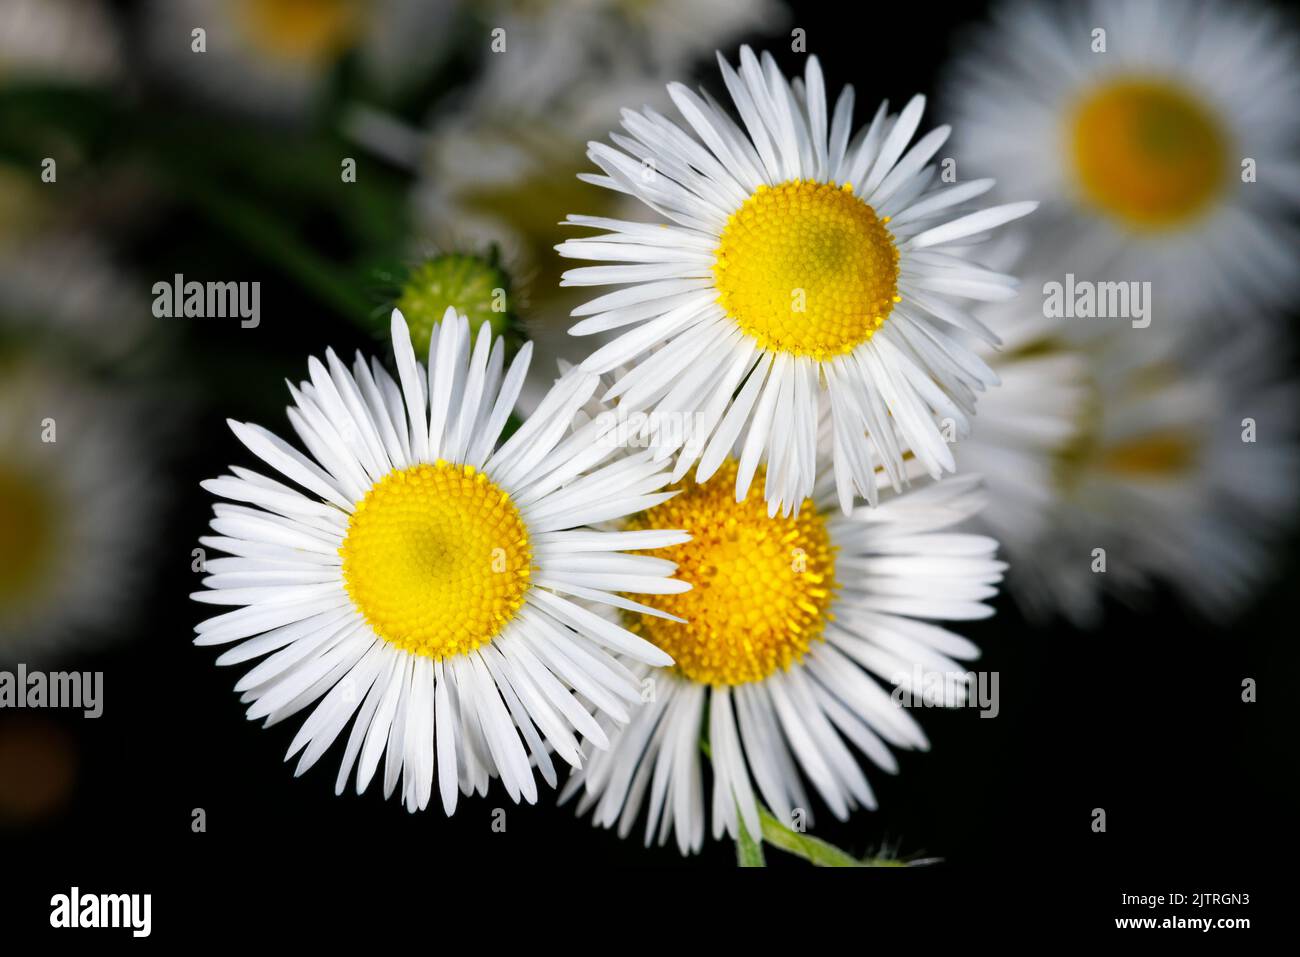 Daisies decorative and medicinal flowers on a blurred dark green background Stock Photo